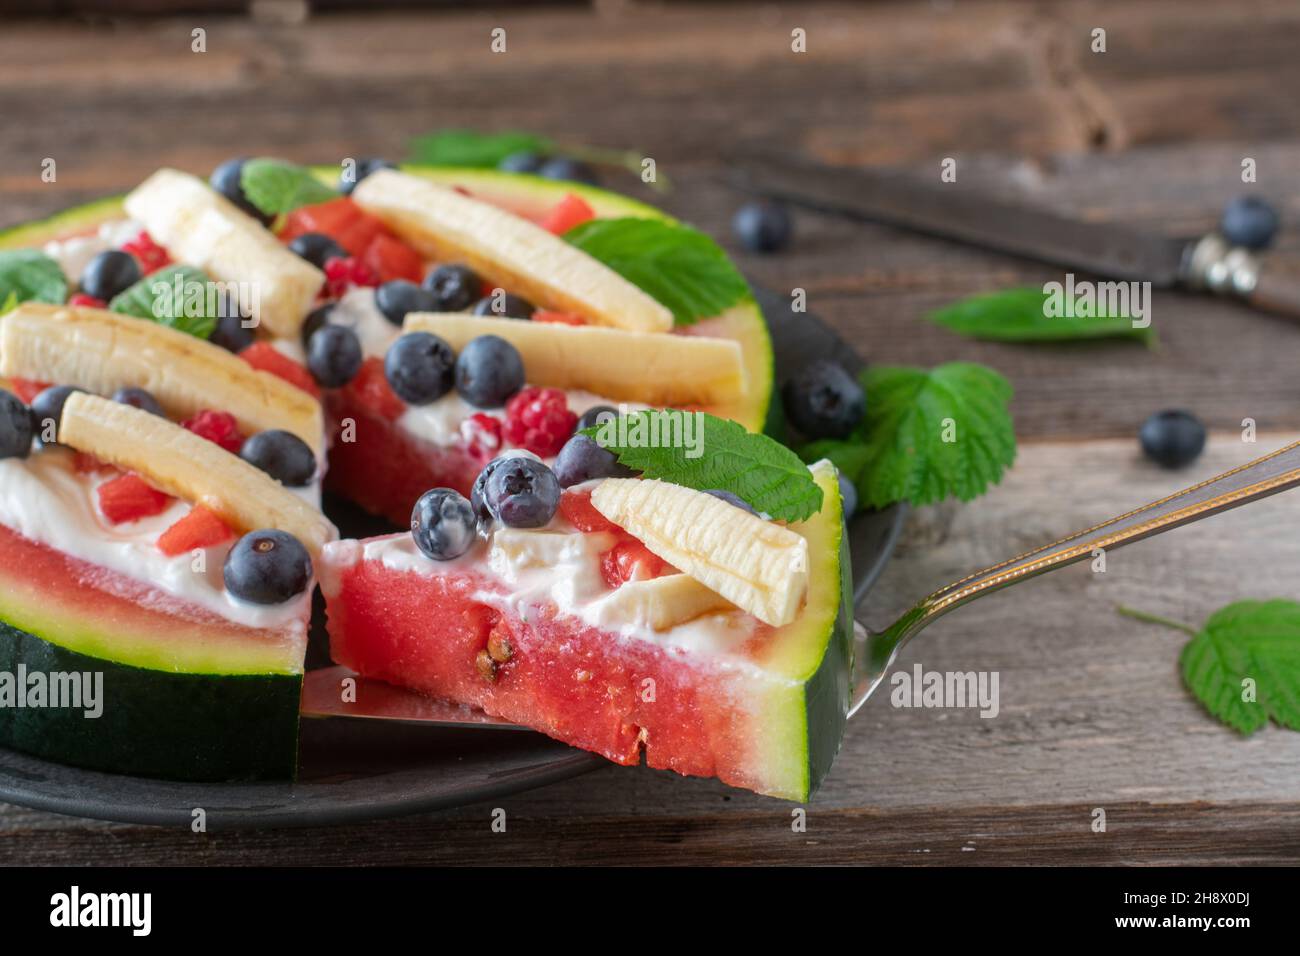 Fitness breakfast or snack for summer season with sliced watermelon, topped with skyr, and fresh fruits Stock Photo